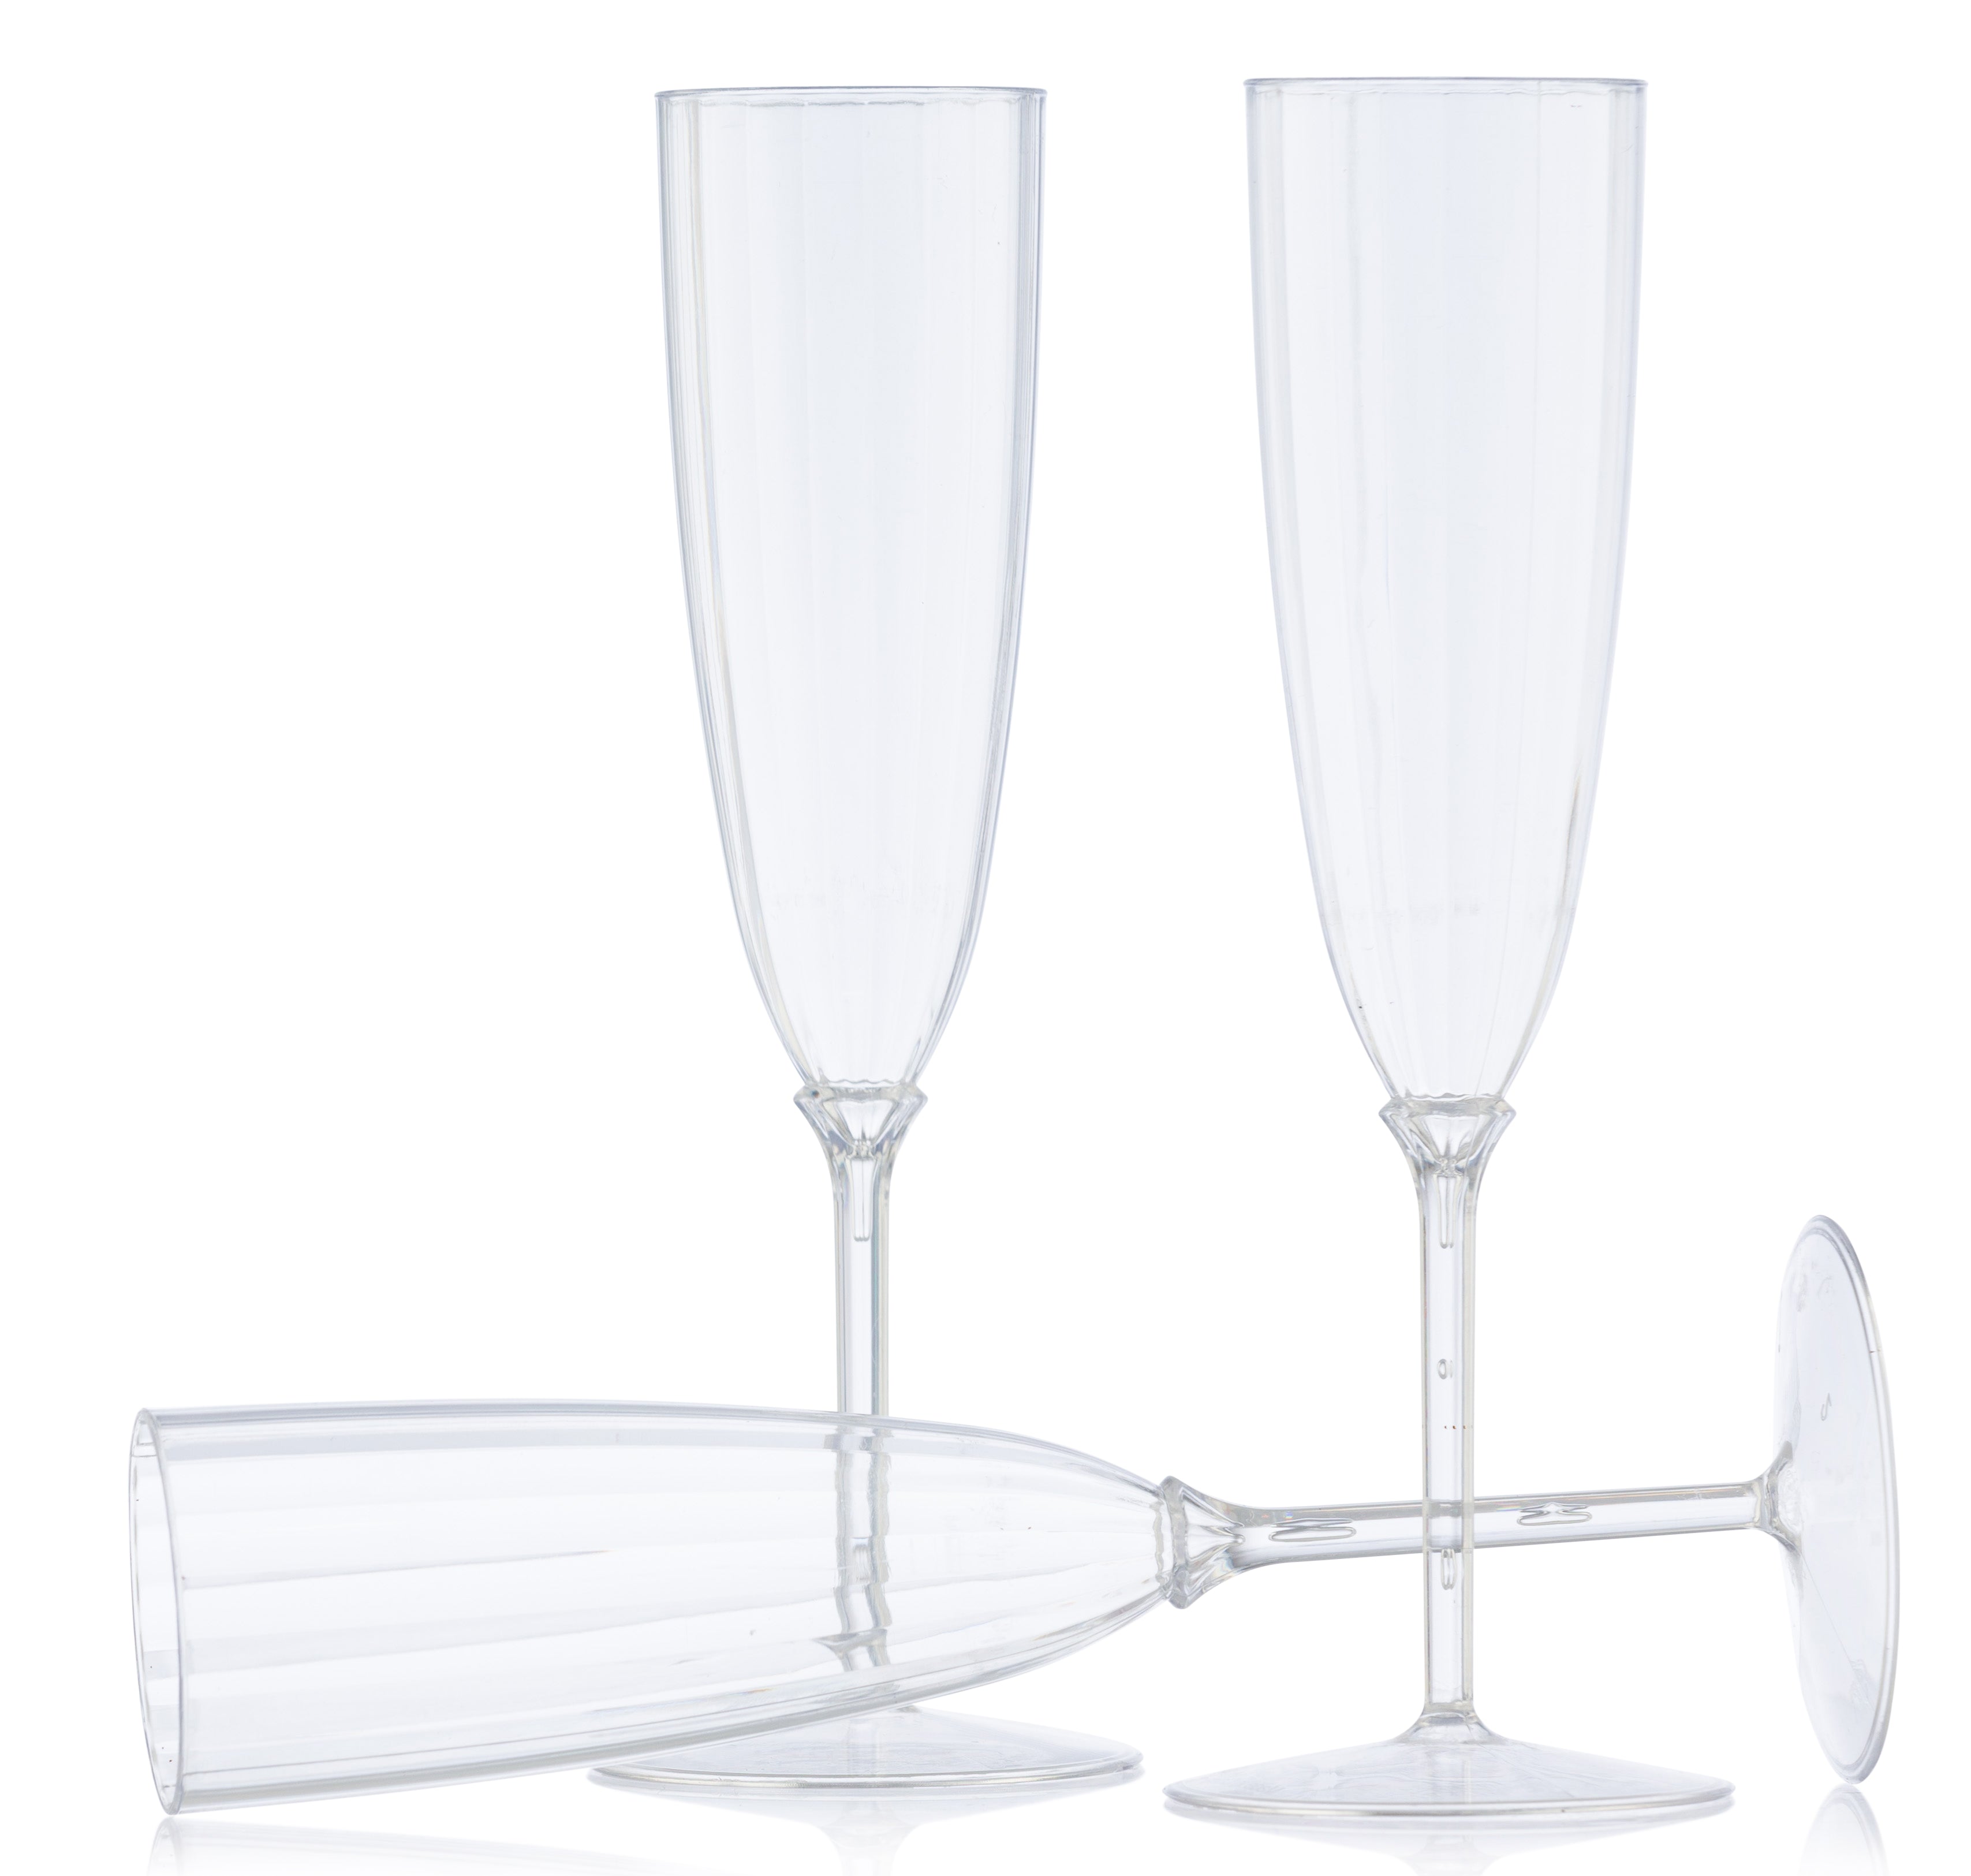 Exquisite Crystal Clear Plastic Martini Glasses - 5 oz Disposable Cocktail Cups (30-Pack), Size: One Size